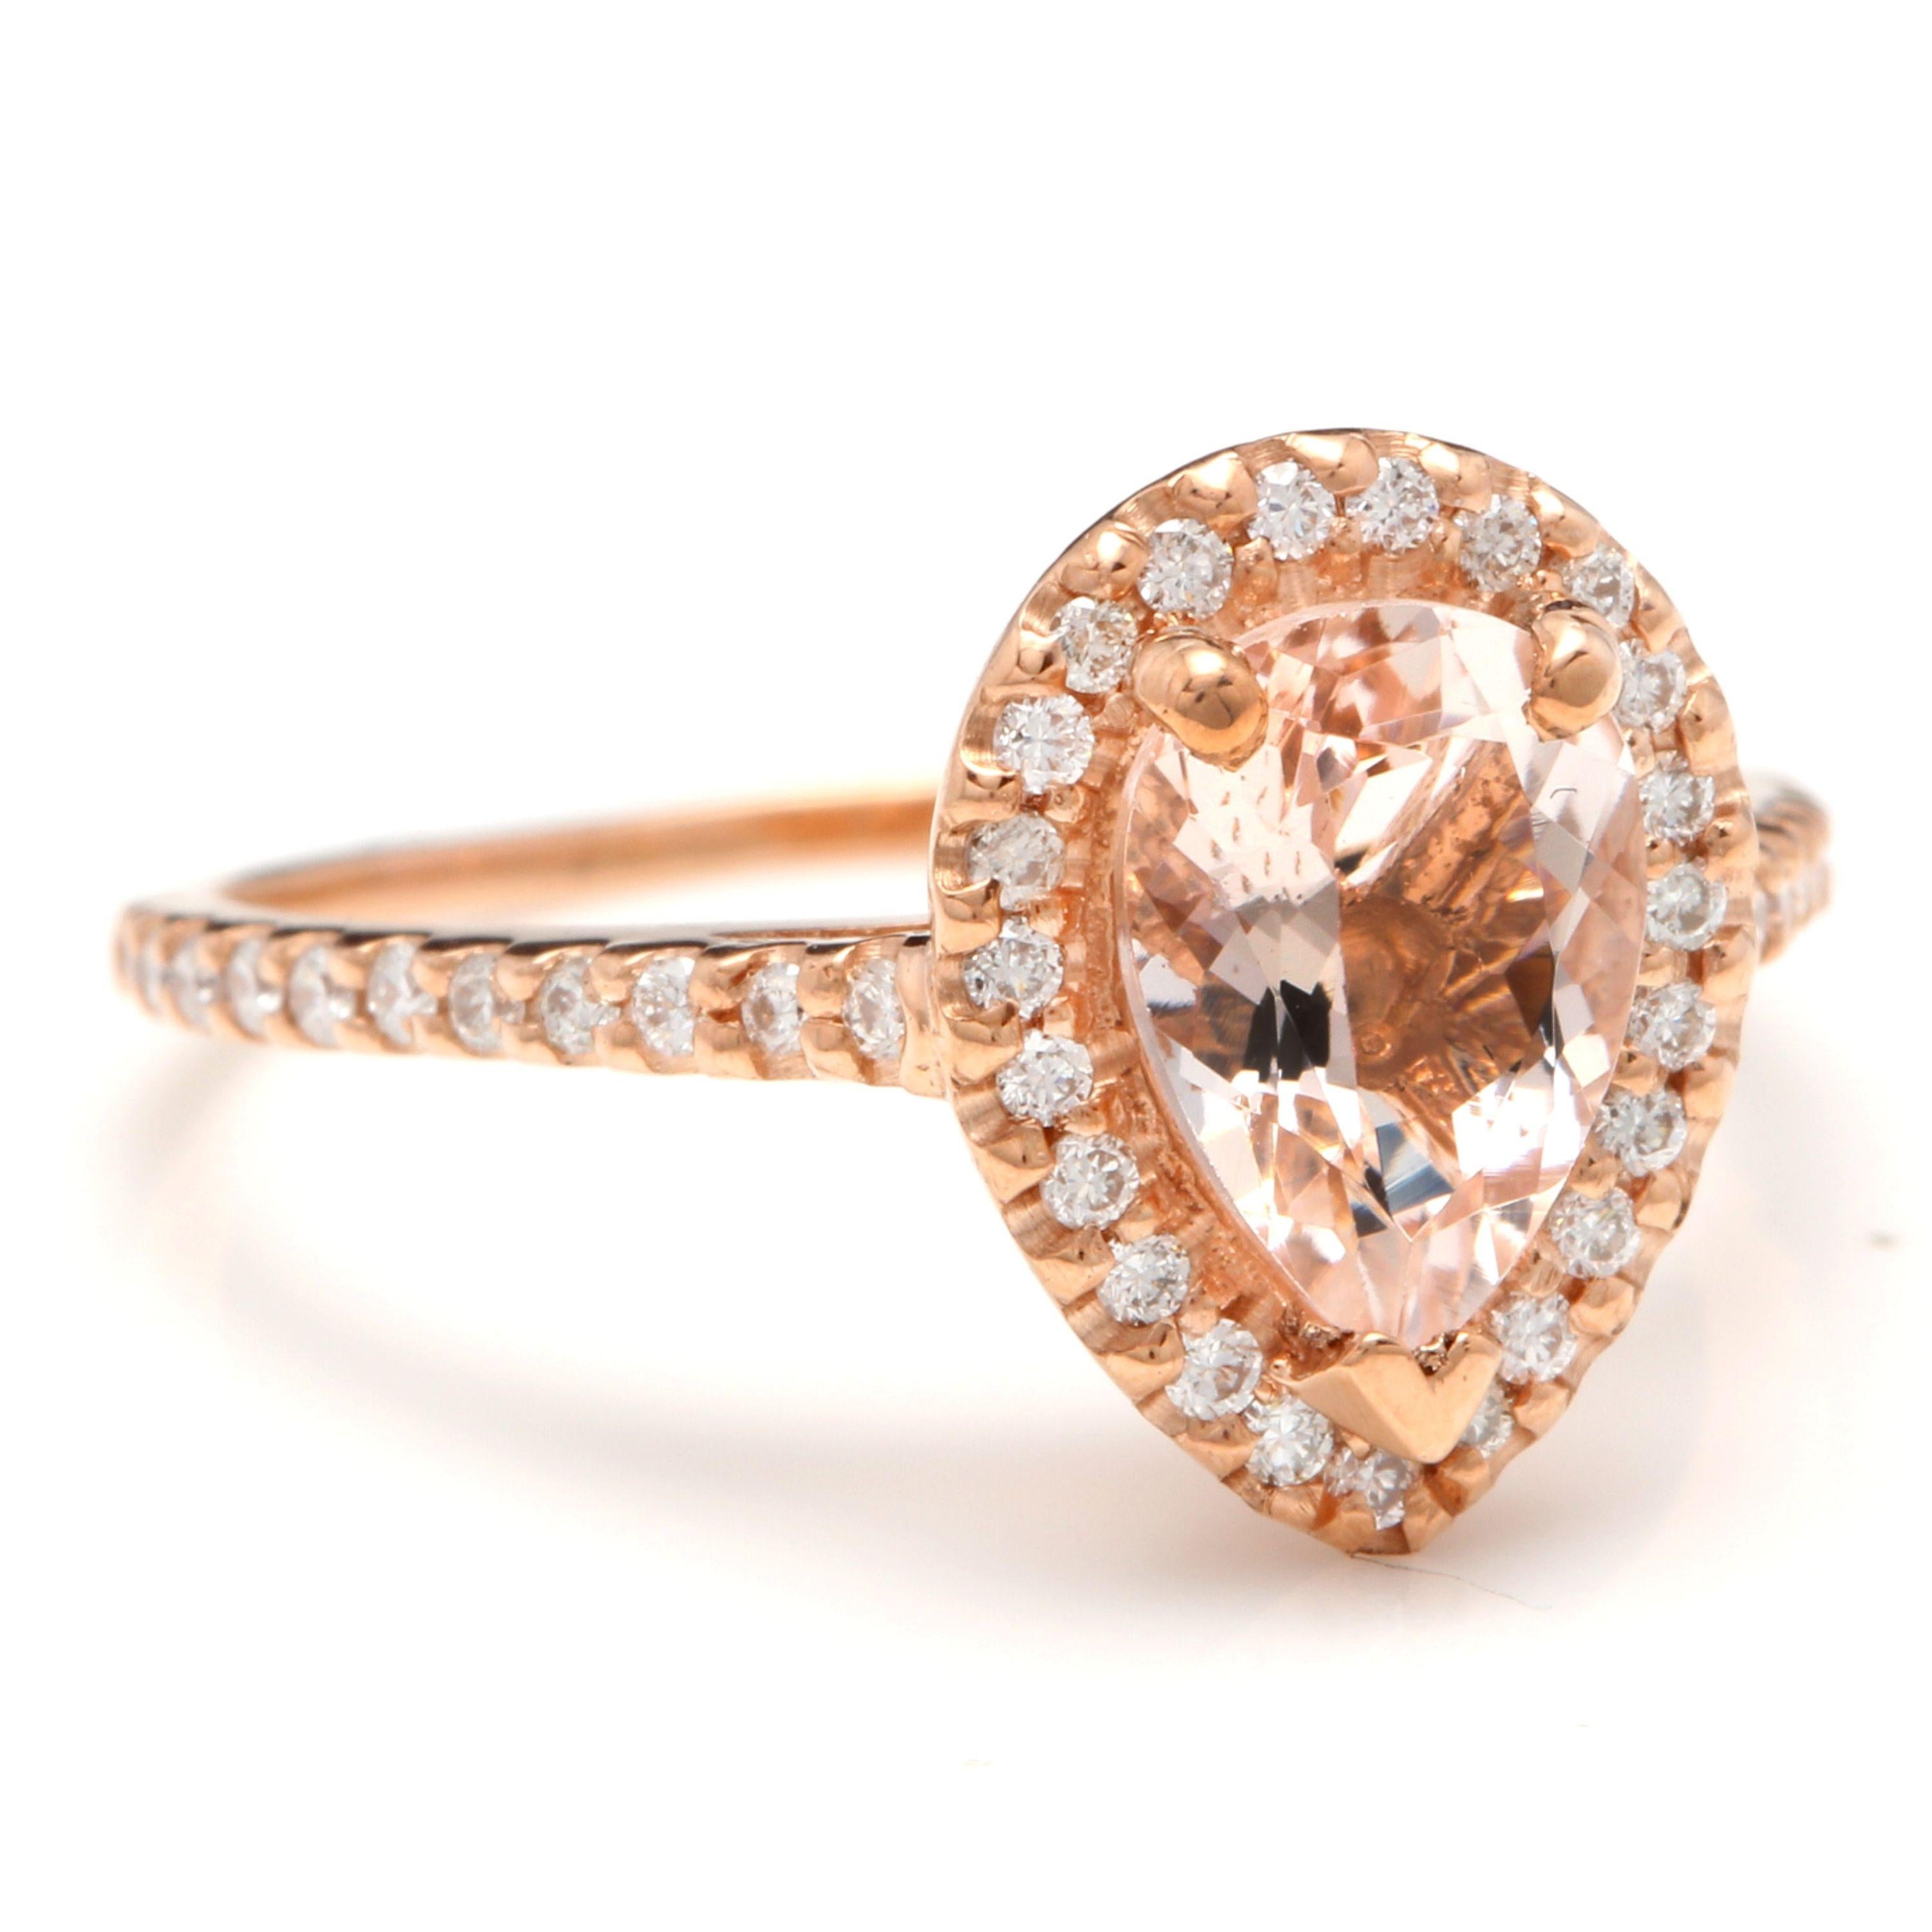 1.40 Carats Exquisite Natural Morganite and Diamond 14K Solid Rose Gold Ring

Total Natural Pear Shaped Morganite Weights: Approx. 1.00 Carats

Morganite Measures: Approx. 9.00 x 6.00mm

Morganite Treatment: Heat

Natural Round Diamonds Weight: